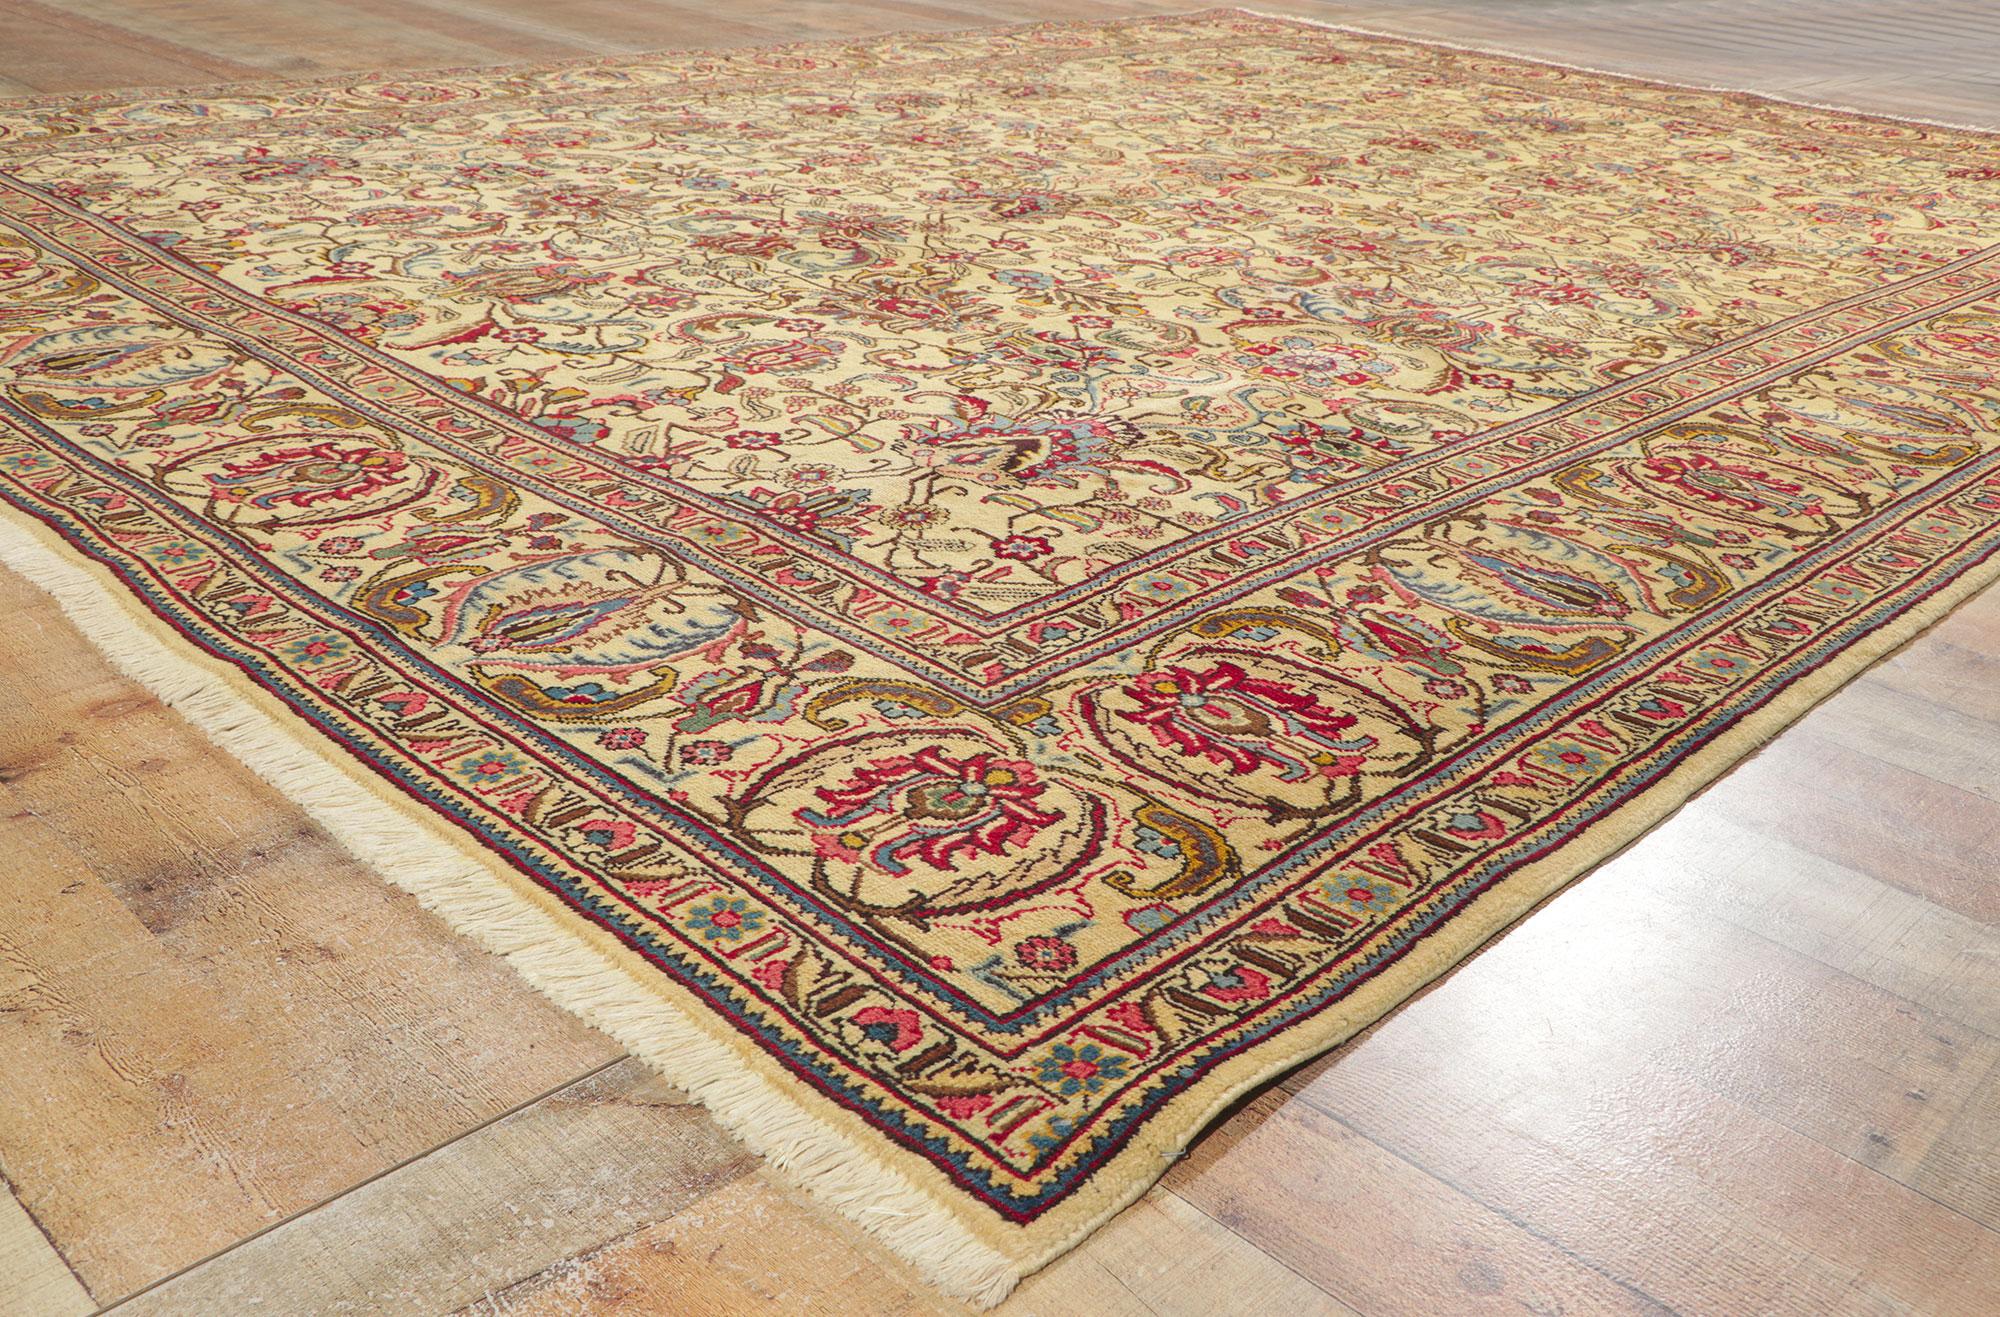 Vintage Persian Tabriz Rug with Pastel Earth-Tone Colors For Sale 1